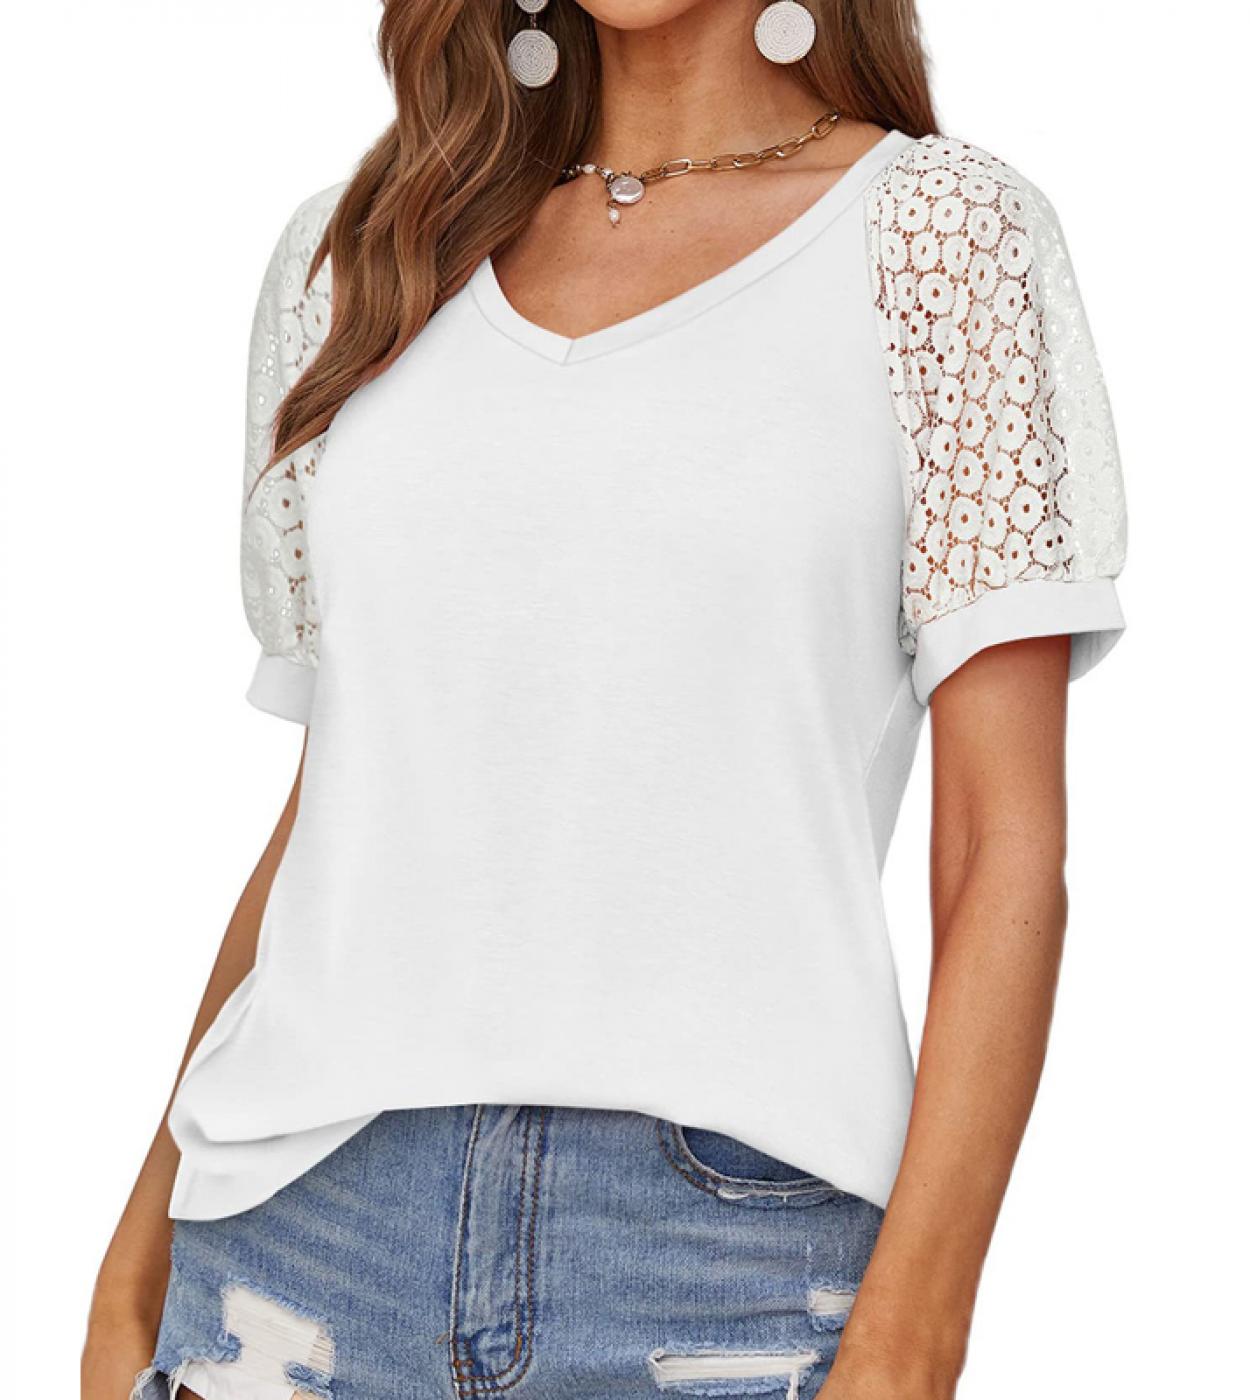 V Neck Summer Lace Stitching T Shirts Casual Blouse Women Hollow Out Short Sleeve Loose Tee Shirt 2023 Tops Tshirt Cloth